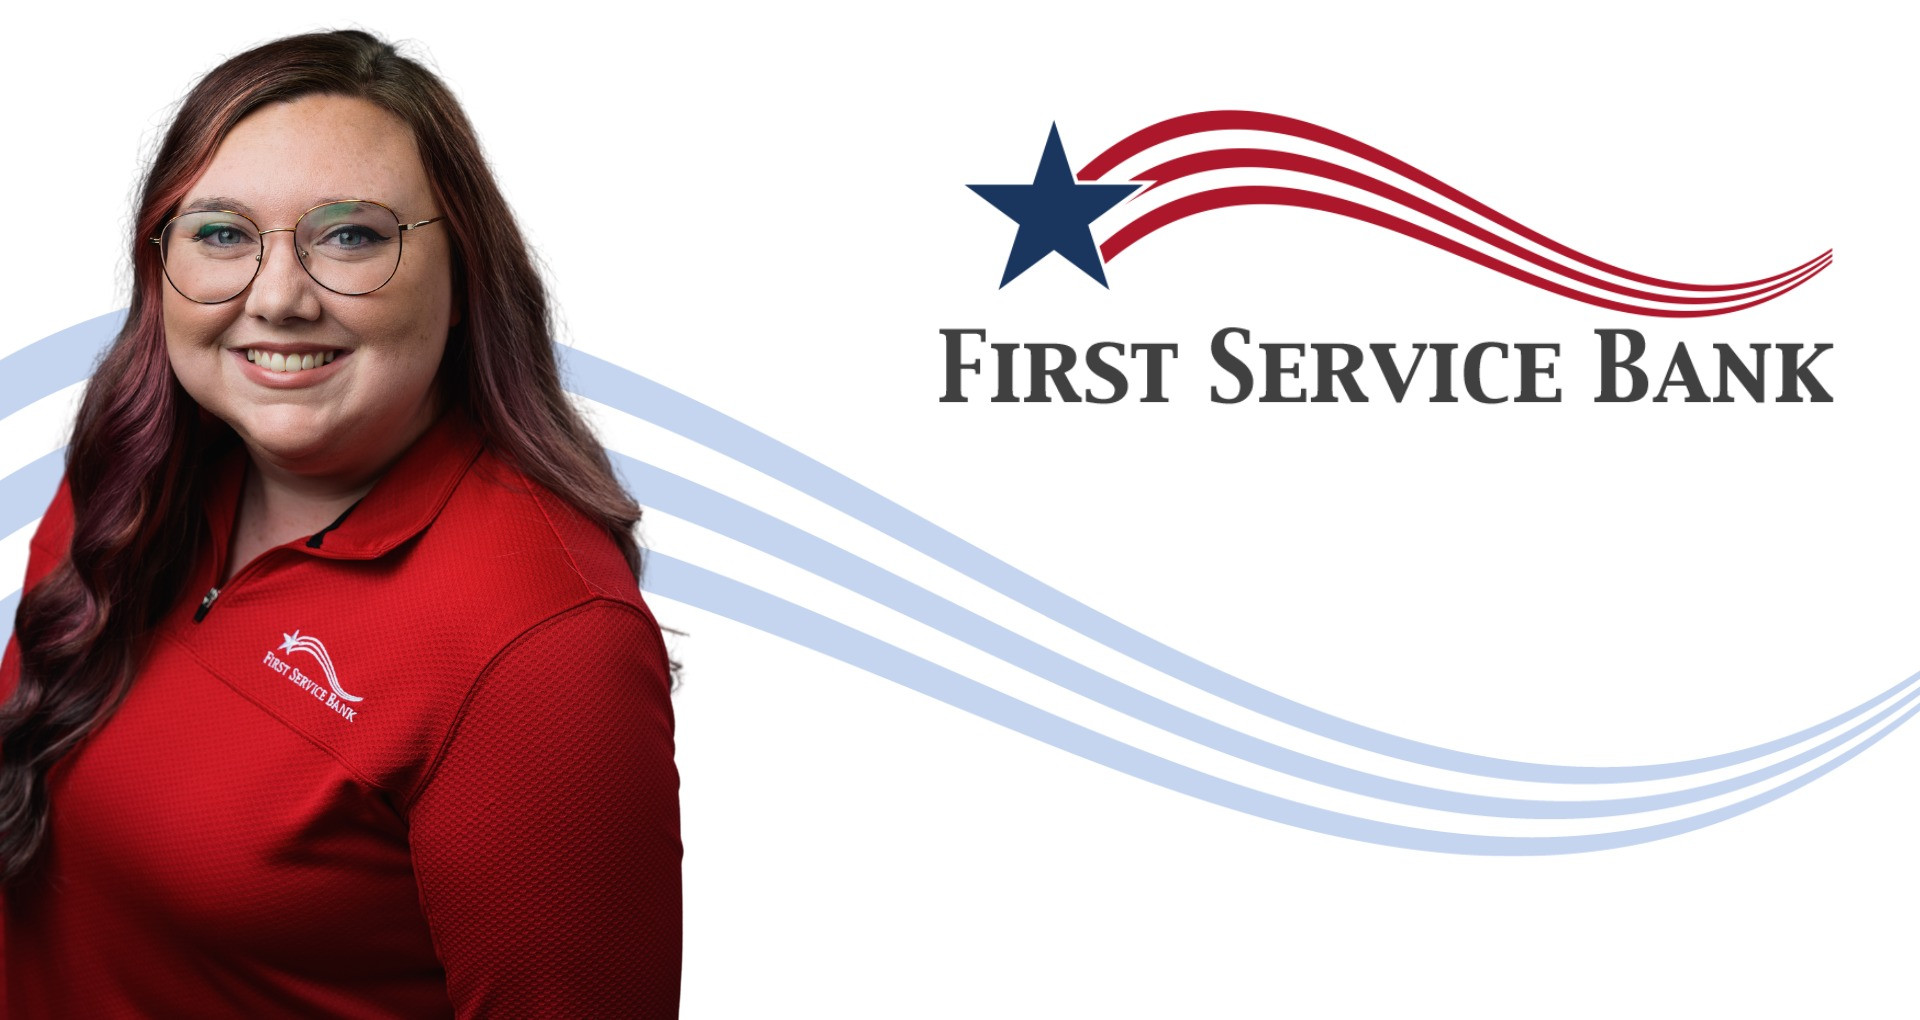 Carrie Beth Allender Promoted to Loan Operations Assistant Manager at First Service Bank